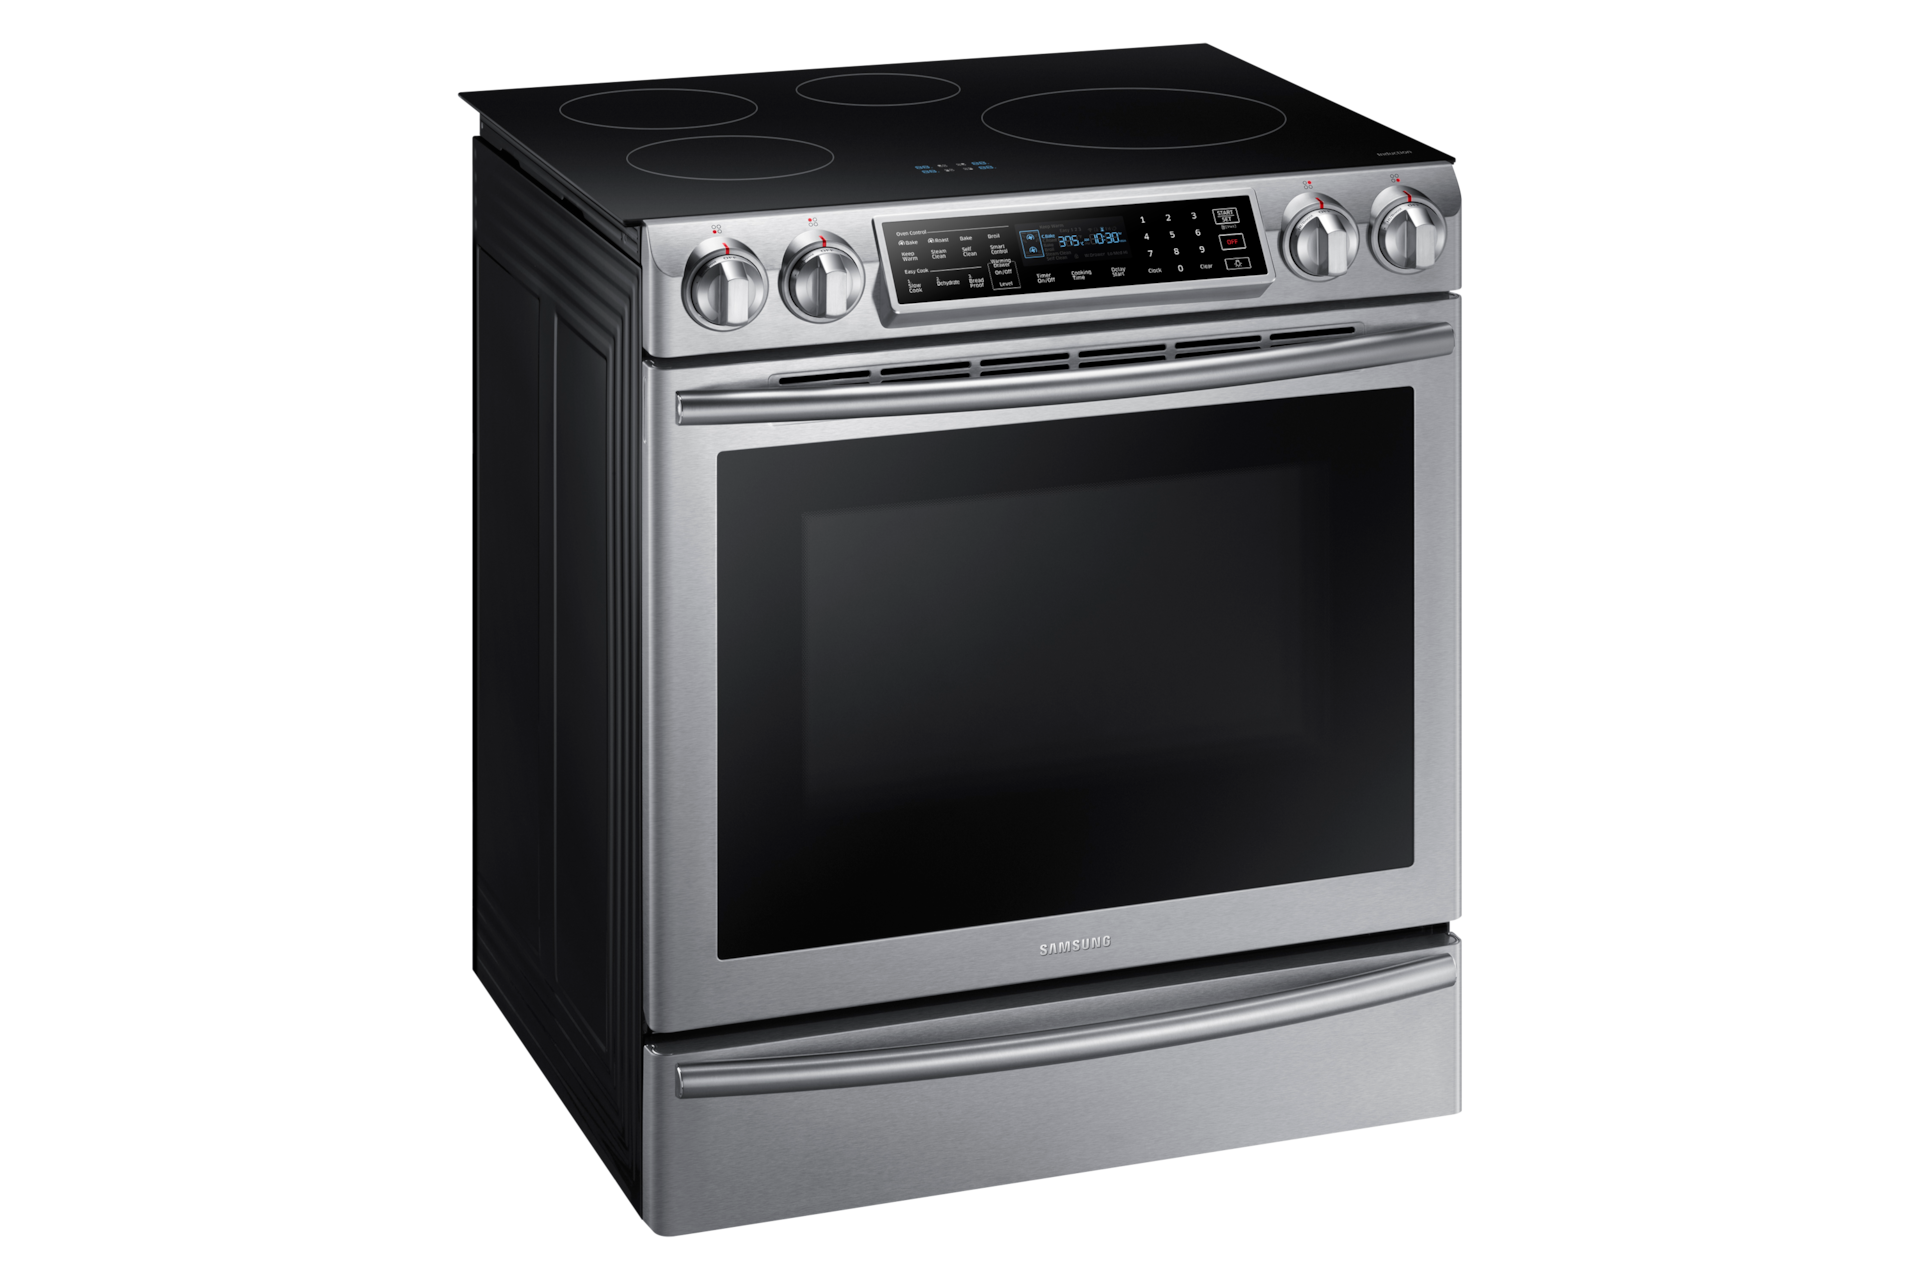 NE9900H Induction Range with Virtual Flame Technology™, 5.8 cu.ft. | SAMSUNG Canada